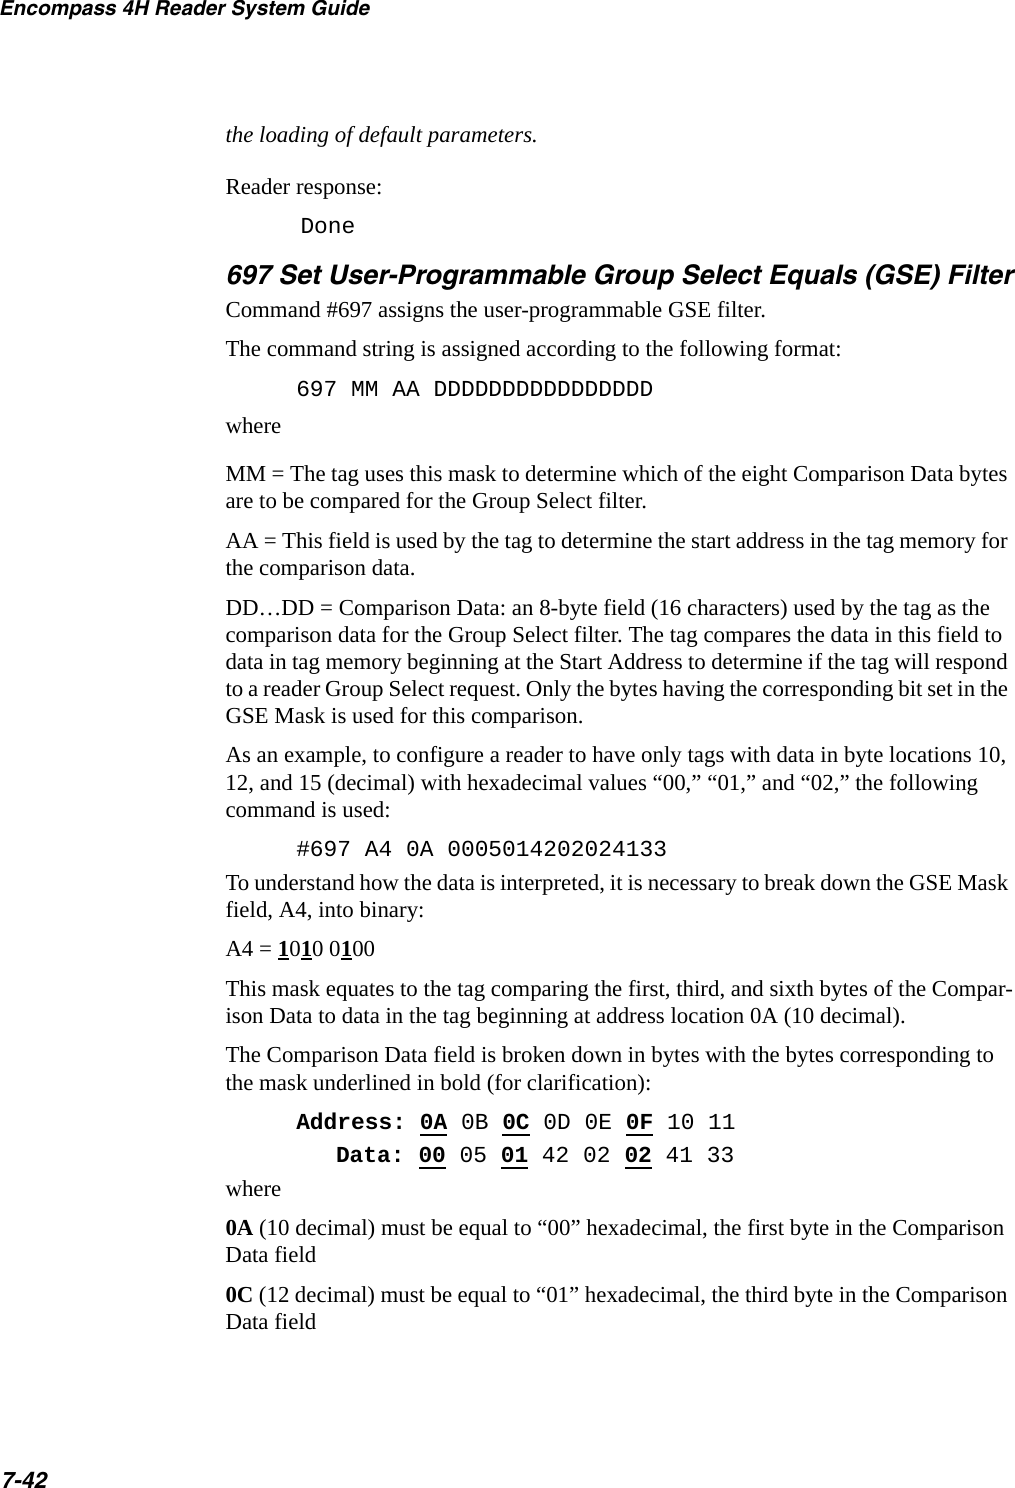 Encompass 4H Reader System Guide7-42the loading of default parameters.Reader response:Done697 Set User-Programmable Group Select Equals (GSE) FilterCommand #697 assigns the user-programmable GSE filter.The command string is assigned according to the following format:697 MM AA DDDDDDDDDDDDDDDDwhereMM = The tag uses this mask to determine which of the eight Comparison Data bytes are to be compared for the Group Select filter.AA = This field is used by the tag to determine the start address in the tag memory for the comparison data.DD…DD = Comparison Data: an 8-byte field (16 characters) used by the tag as the comparison data for the Group Select filter. The tag compares the data in this field to data in tag memory beginning at the Start Address to determine if the tag will respond to a reader Group Select request. Only the bytes having the corresponding bit set in the GSE Mask is used for this comparison.As an example, to configure a reader to have only tags with data in byte locations 10, 12, and 15 (decimal) with hexadecimal values “00,” “01,” and “02,” the following command is used:#697 A4 0A 0005014202024133To understand how the data is interpreted, it is necessary to break down the GSE Mask field, A4, into binary:A4 = 1010 0100This mask equates to the tag comparing the first, third, and sixth bytes of the Compar-ison Data to data in the tag beginning at address location 0A (10 decimal).The Comparison Data field is broken down in bytes with the bytes corresponding to the mask underlined in bold (for clarification):Address: 0A 0B 0C 0D 0E 0F 10 11Data: 00 05 01 42 02 02 41 33where0A (10 decimal) must be equal to “00” hexadecimal, the first byte in the Comparison Data field0C (12 decimal) must be equal to “01” hexadecimal, the third byte in the Comparison Data field